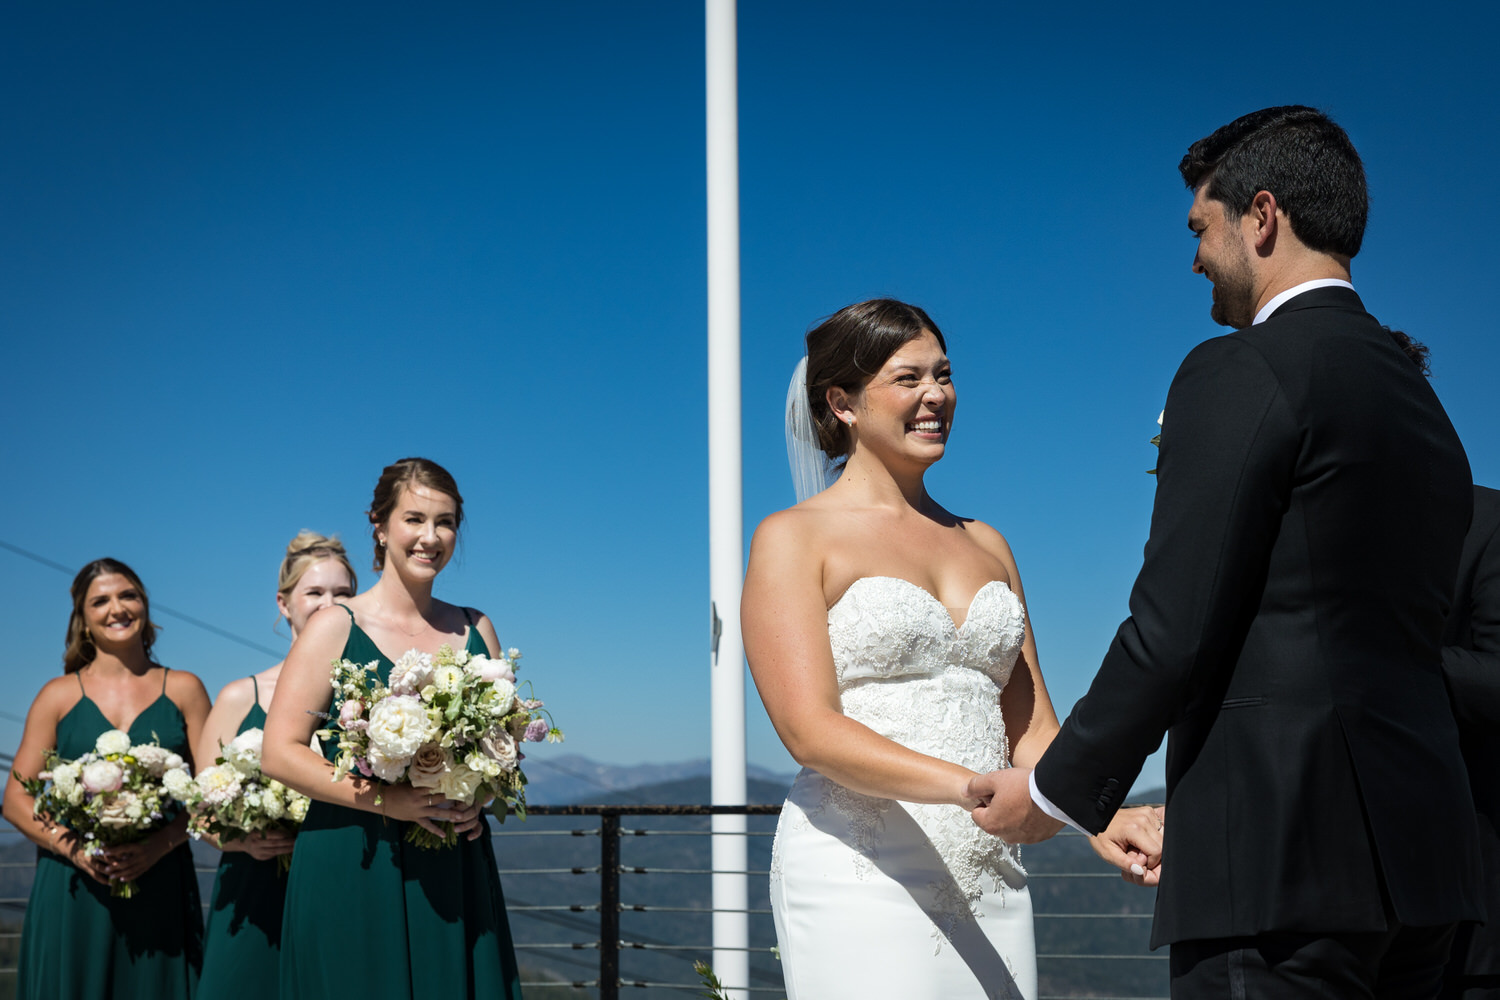 A joyful bride smiles at her groom during a summer wedding at Palisades Tahoe.